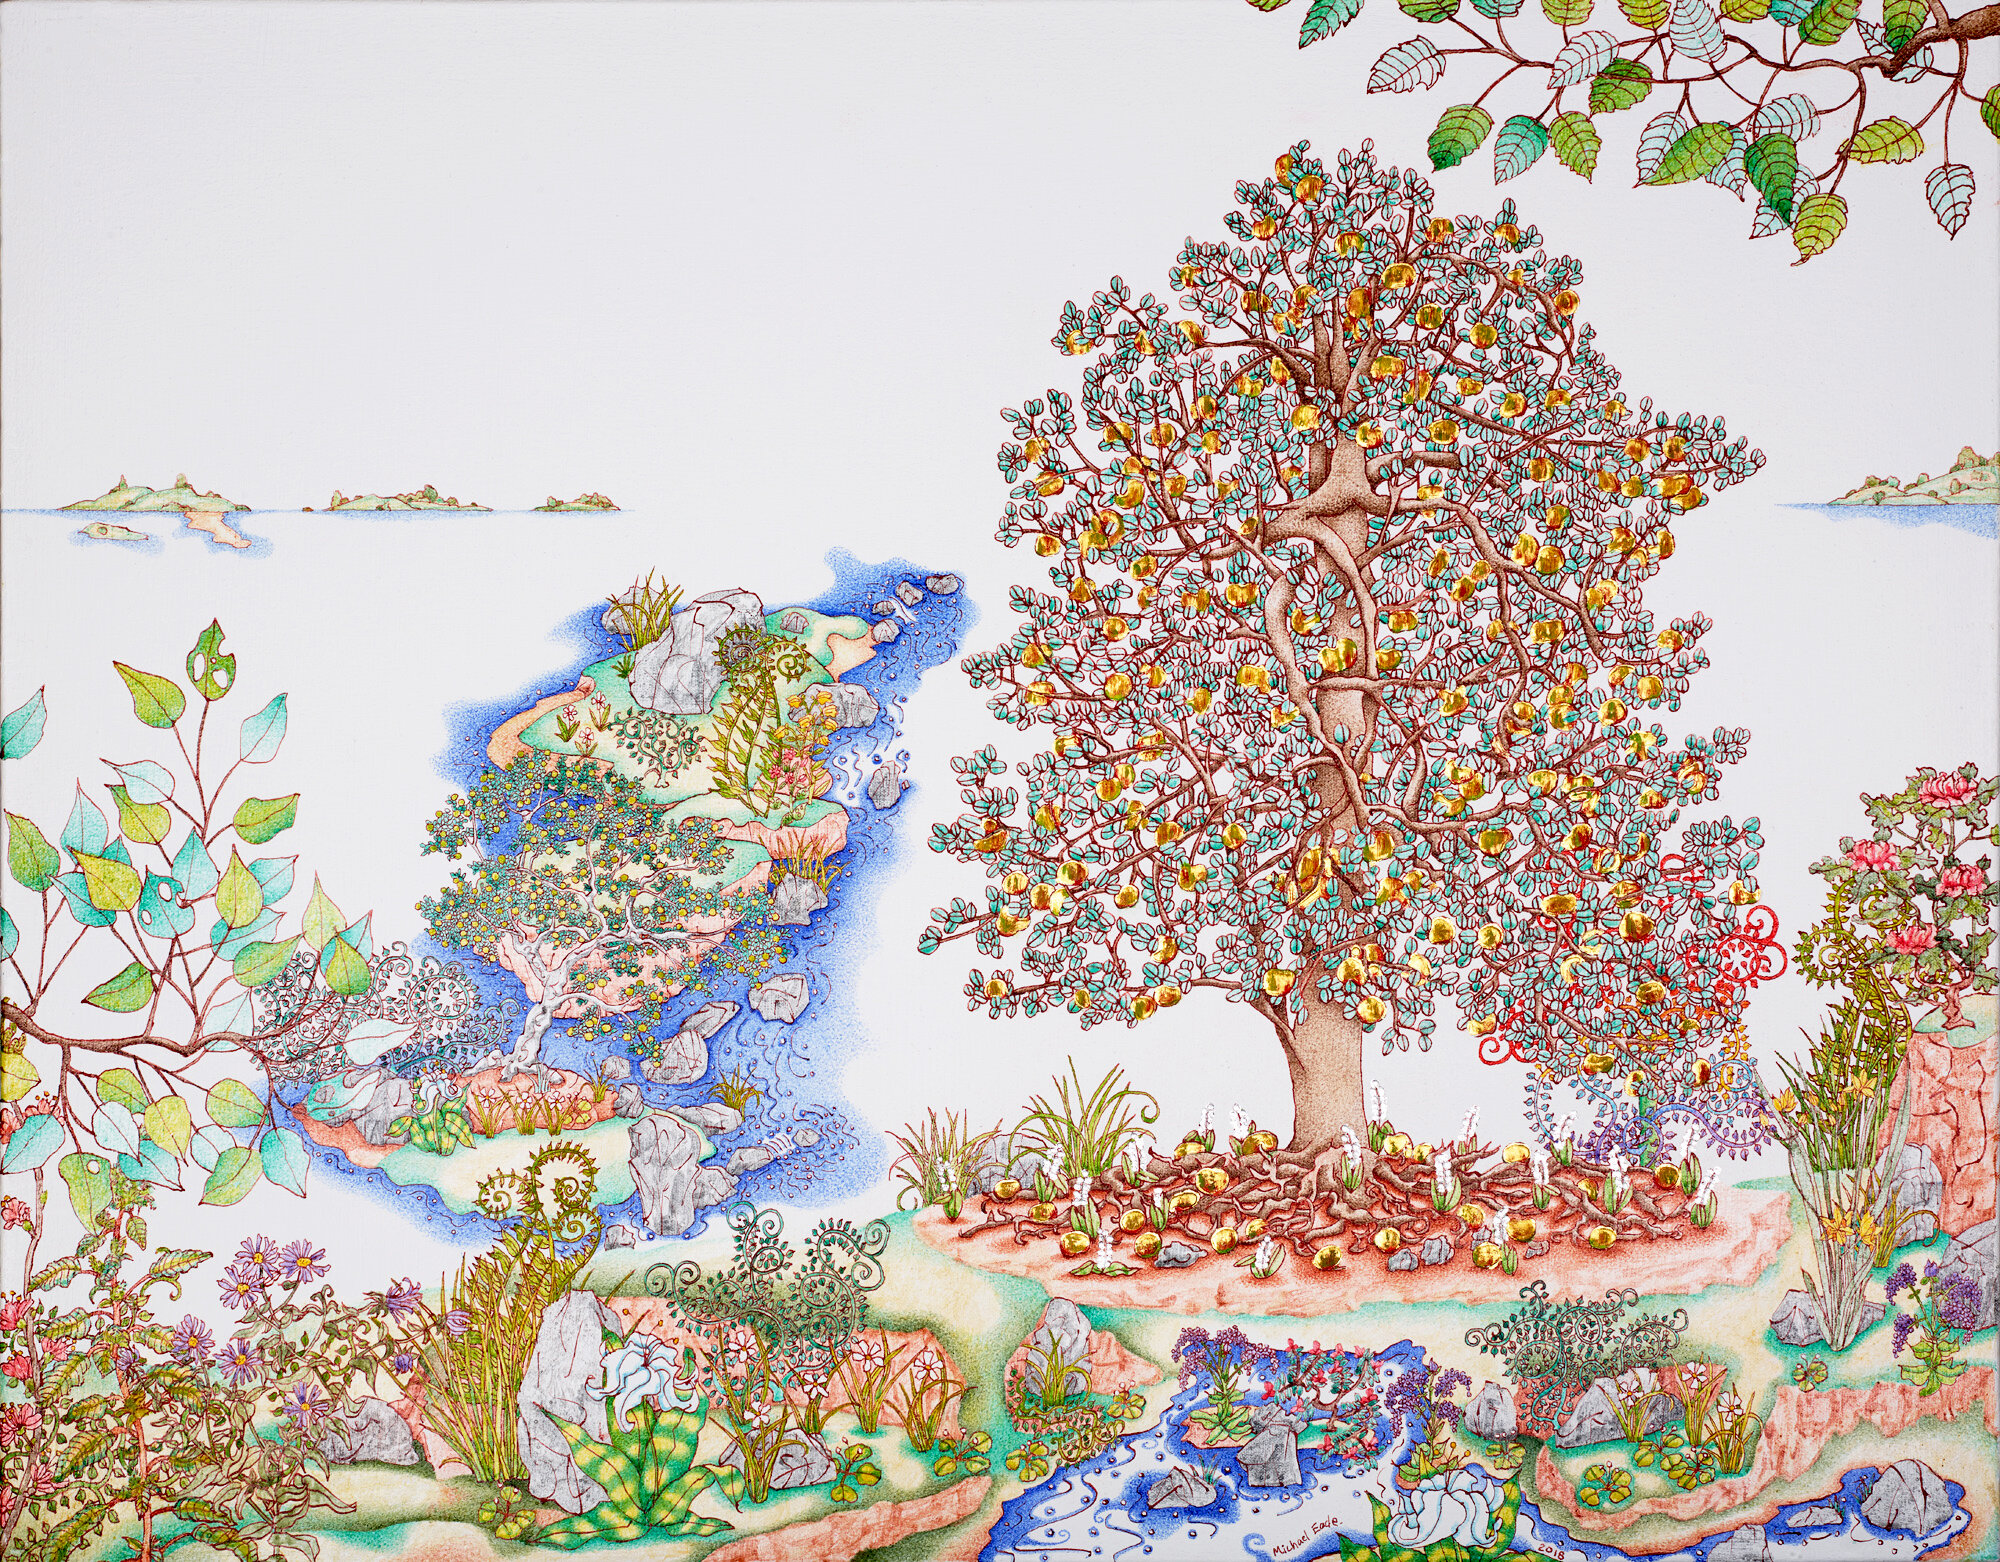  Michael Eade.  Inlet and Tree of Life 生命之树小湾， Egg tempera, raised 22k gold leaf, raised aluminum leaf, oil on canvas, 22 × 28 in. (55.8 x 71.1 cm), 2018. 